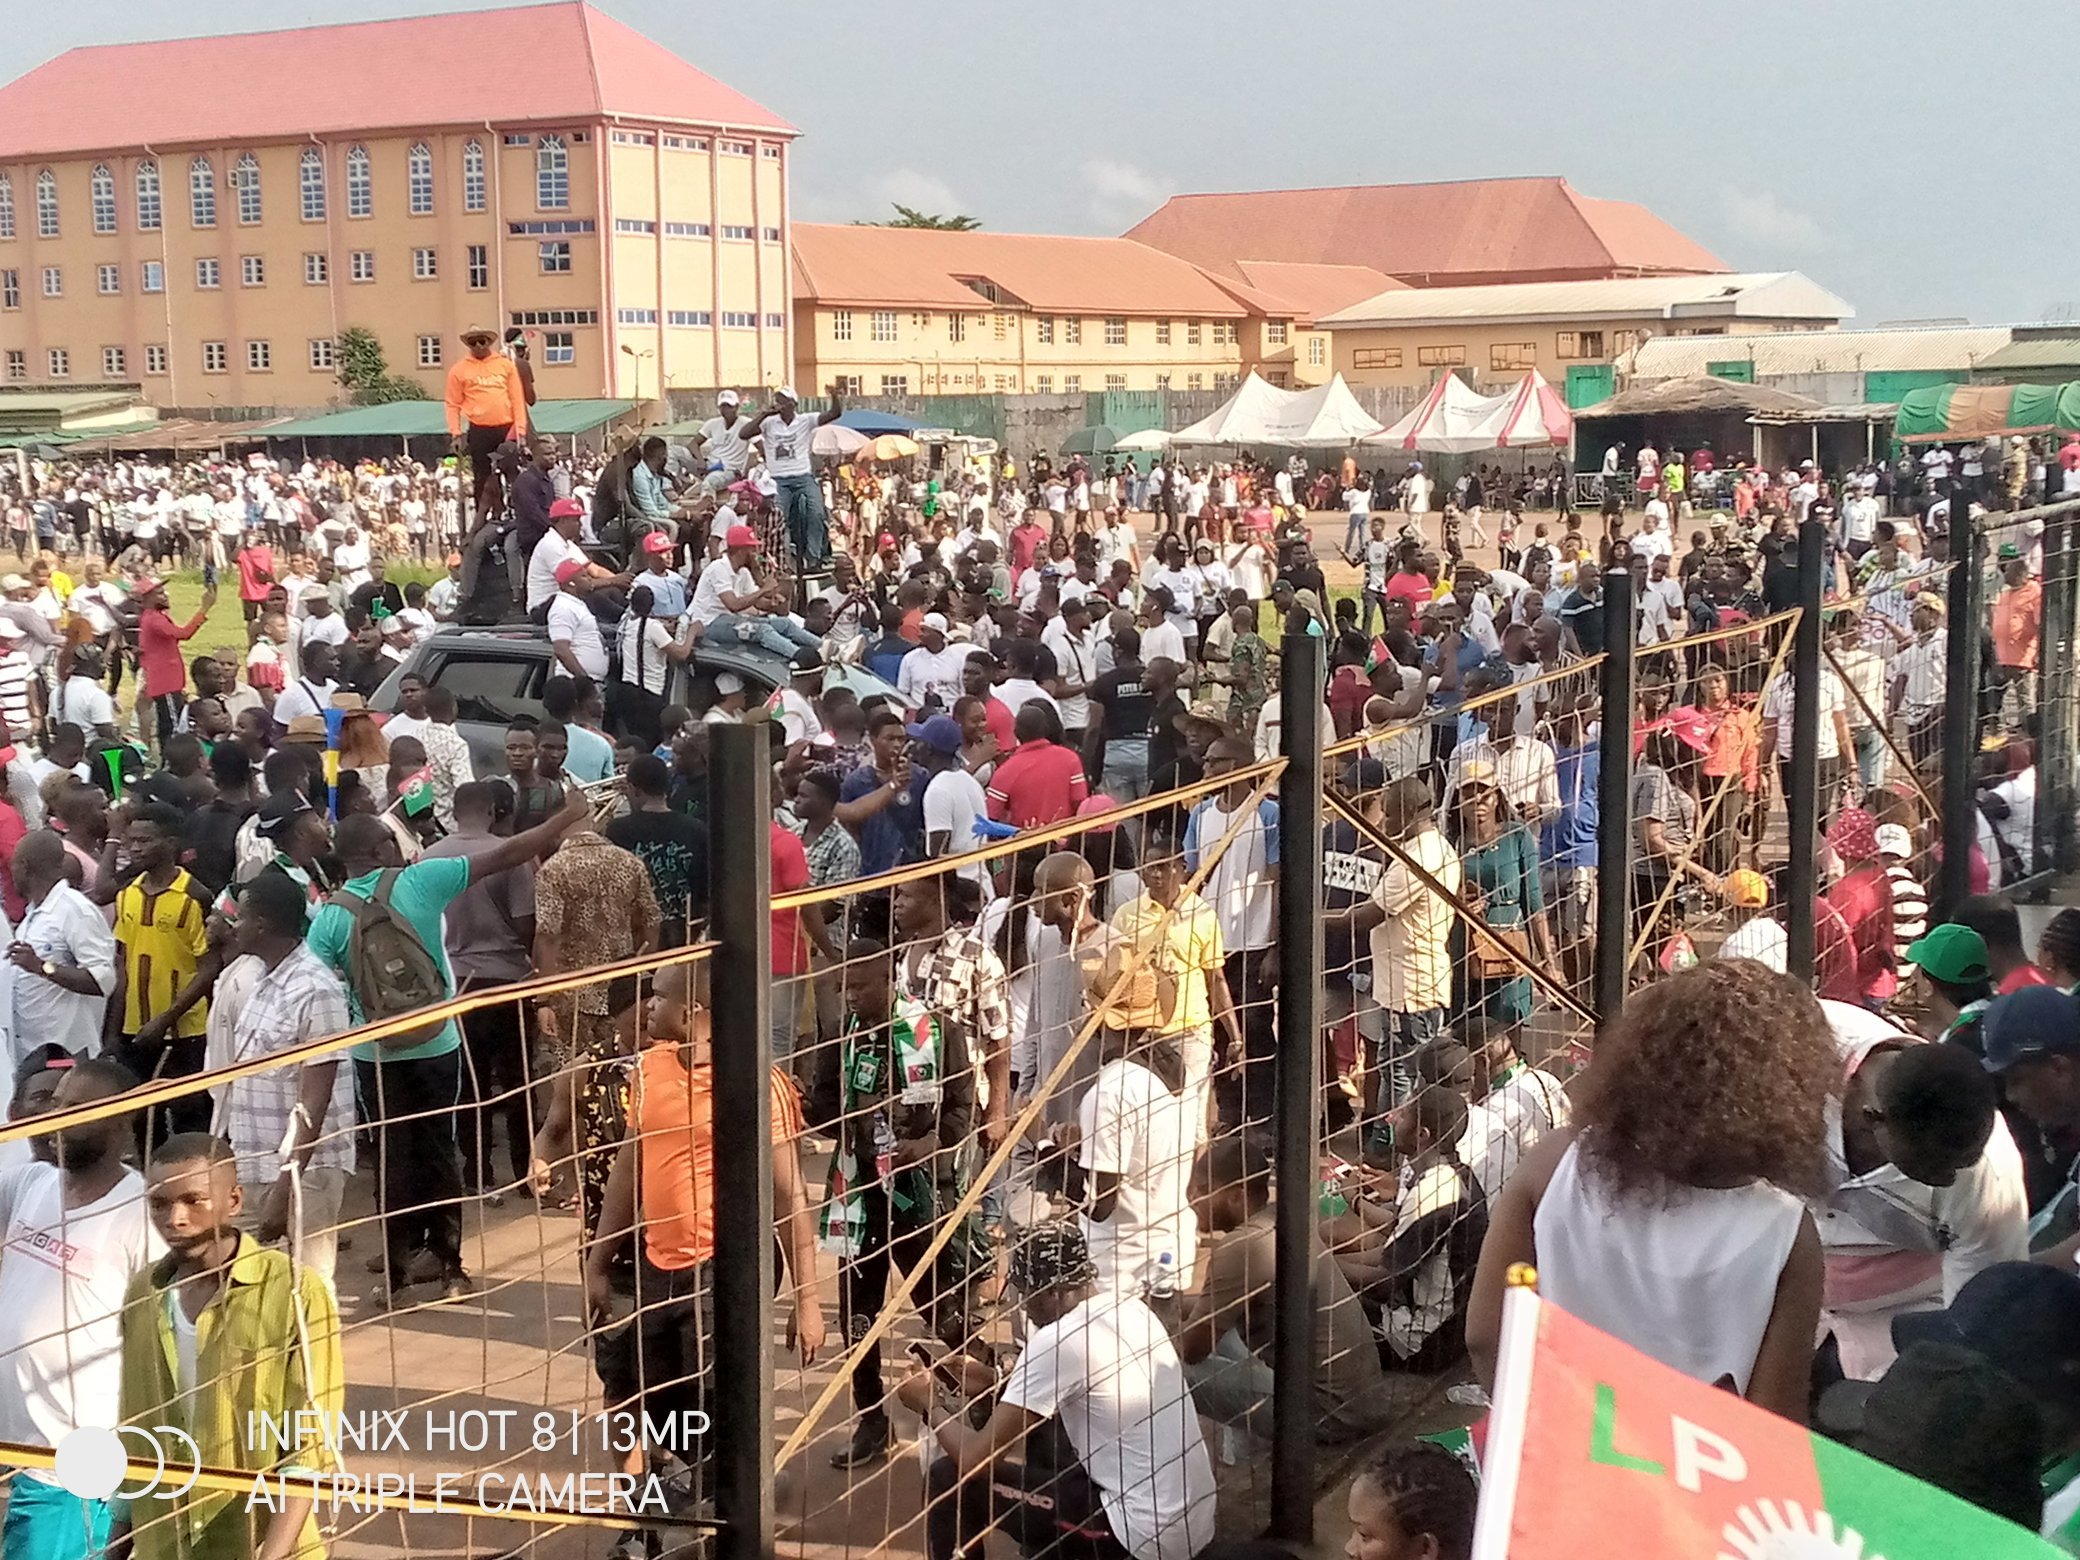 Peter Obi’s supporters dare IPOB, shut down Onitsha with mega rally